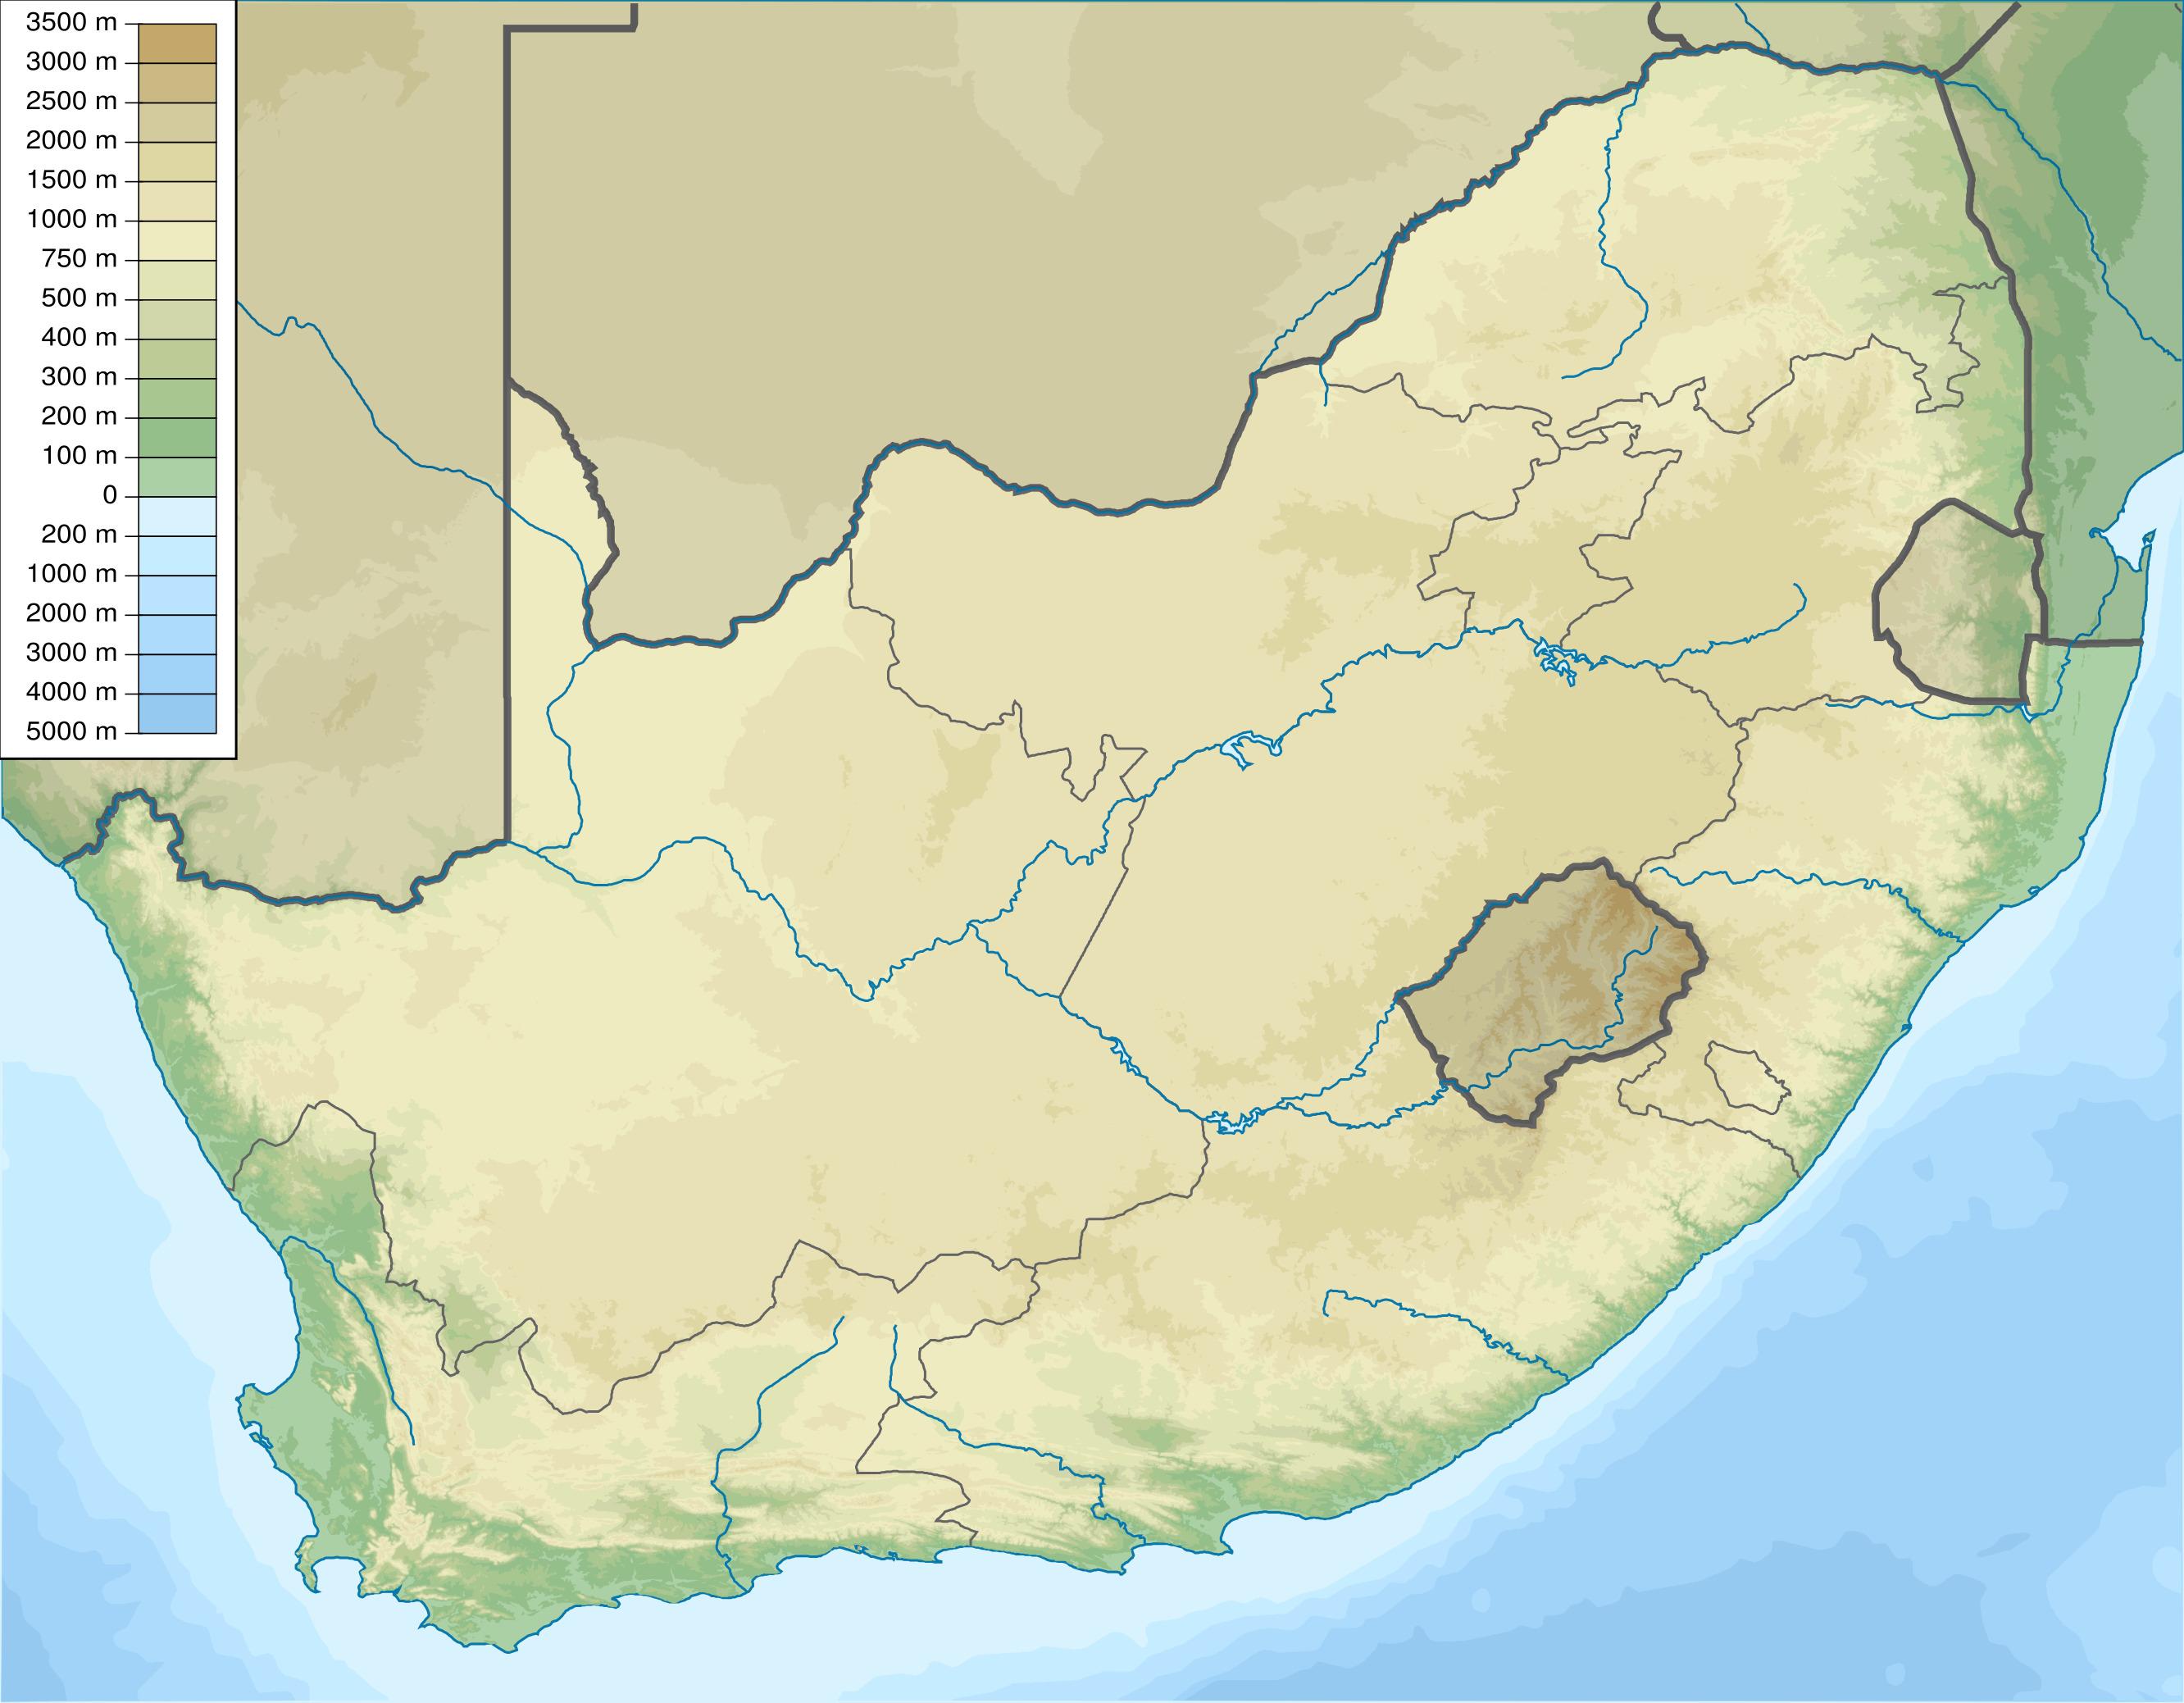 geographical-map-of-south-africa-topography-and-physical-features-of